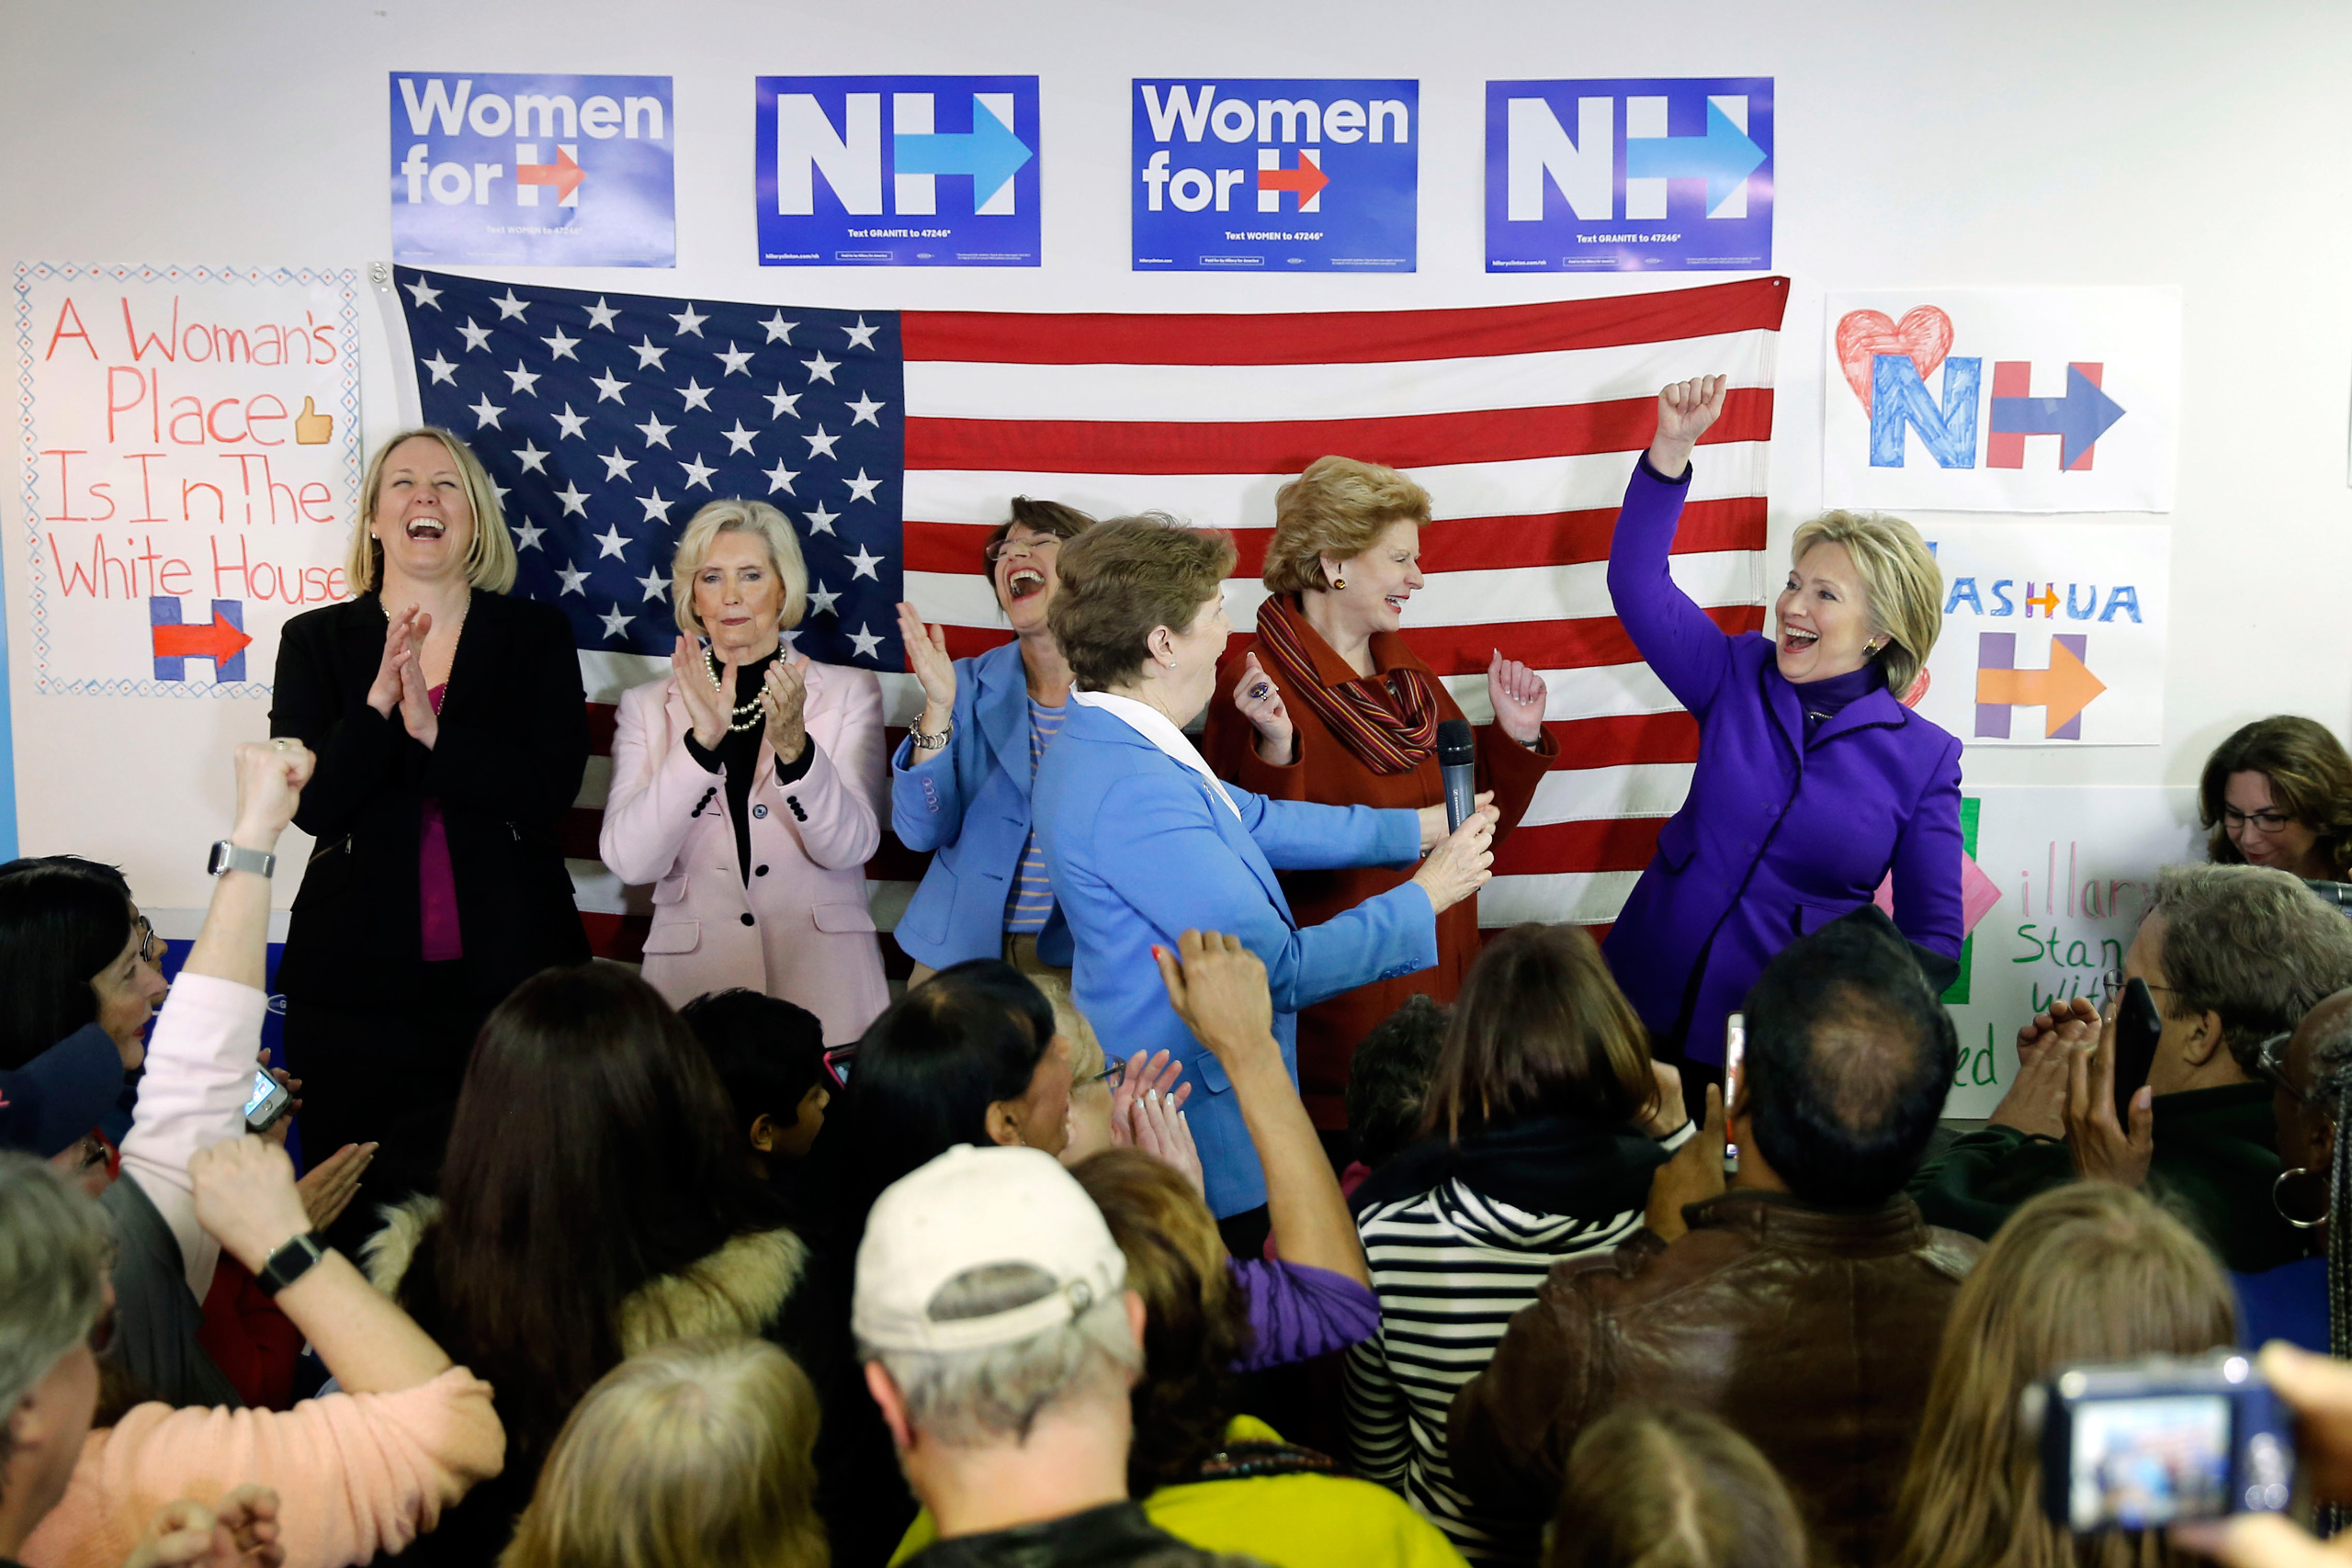 Democratic presidential candidate Hillary Clinton, right, is joined on staged EMILY's List President Stephanie Schriock, left, Lily Ledbetter, Sen. Amy Klobuchar, D-Minn., Jeanne Shaheen, D-N.H., and Sen. Debbie Stabenow, D-Mich., during a visit to a campaign office Friday, Feb. 5, 2016, in Nashua, N.H. (AP Photo/Matt Rourke)